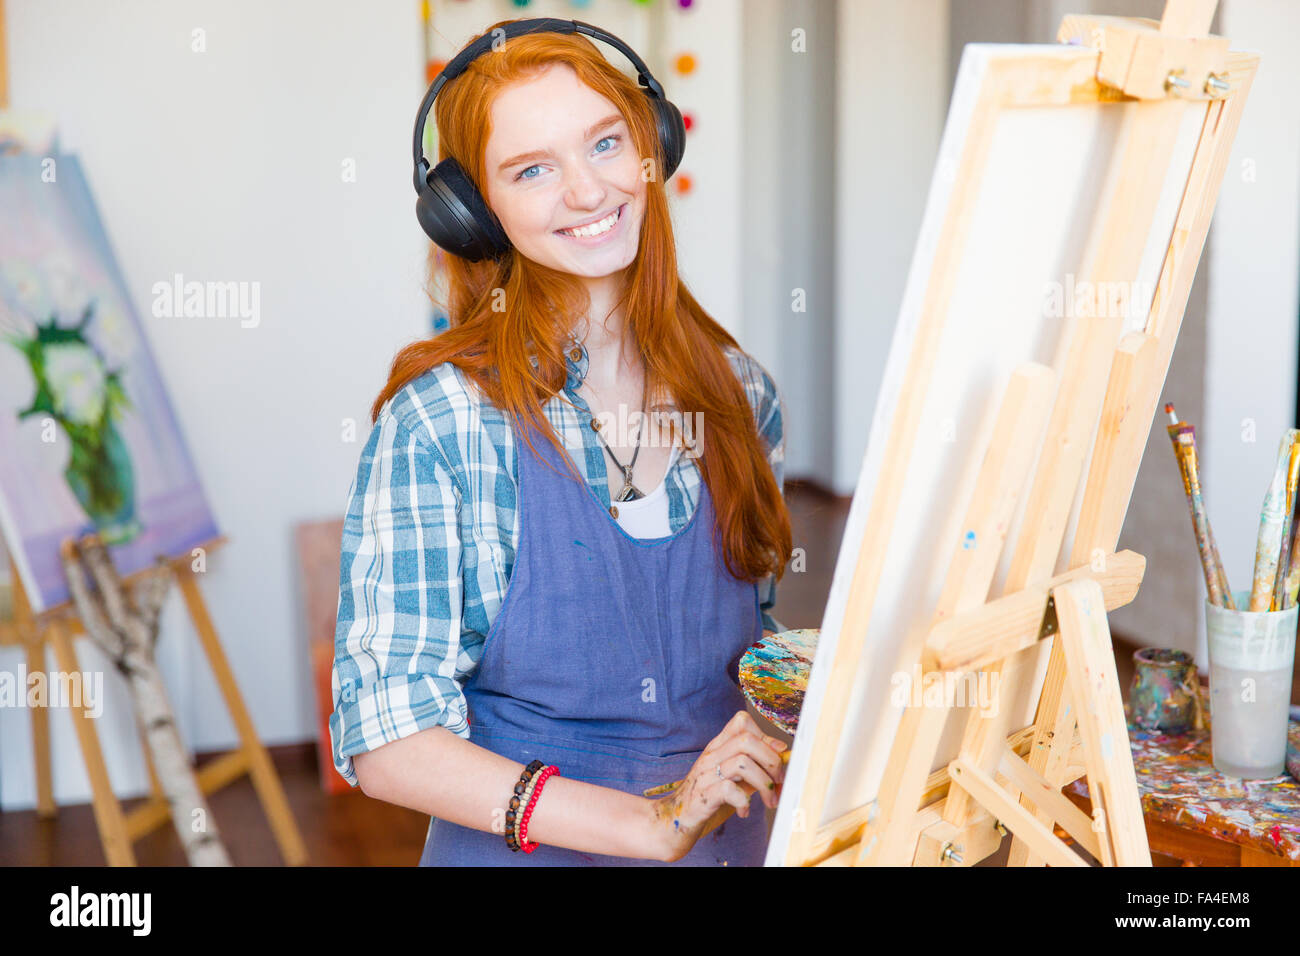 Charming smiling young woman artist in headphones and apron painting on canvas and listening to music in art studio Stock Photo